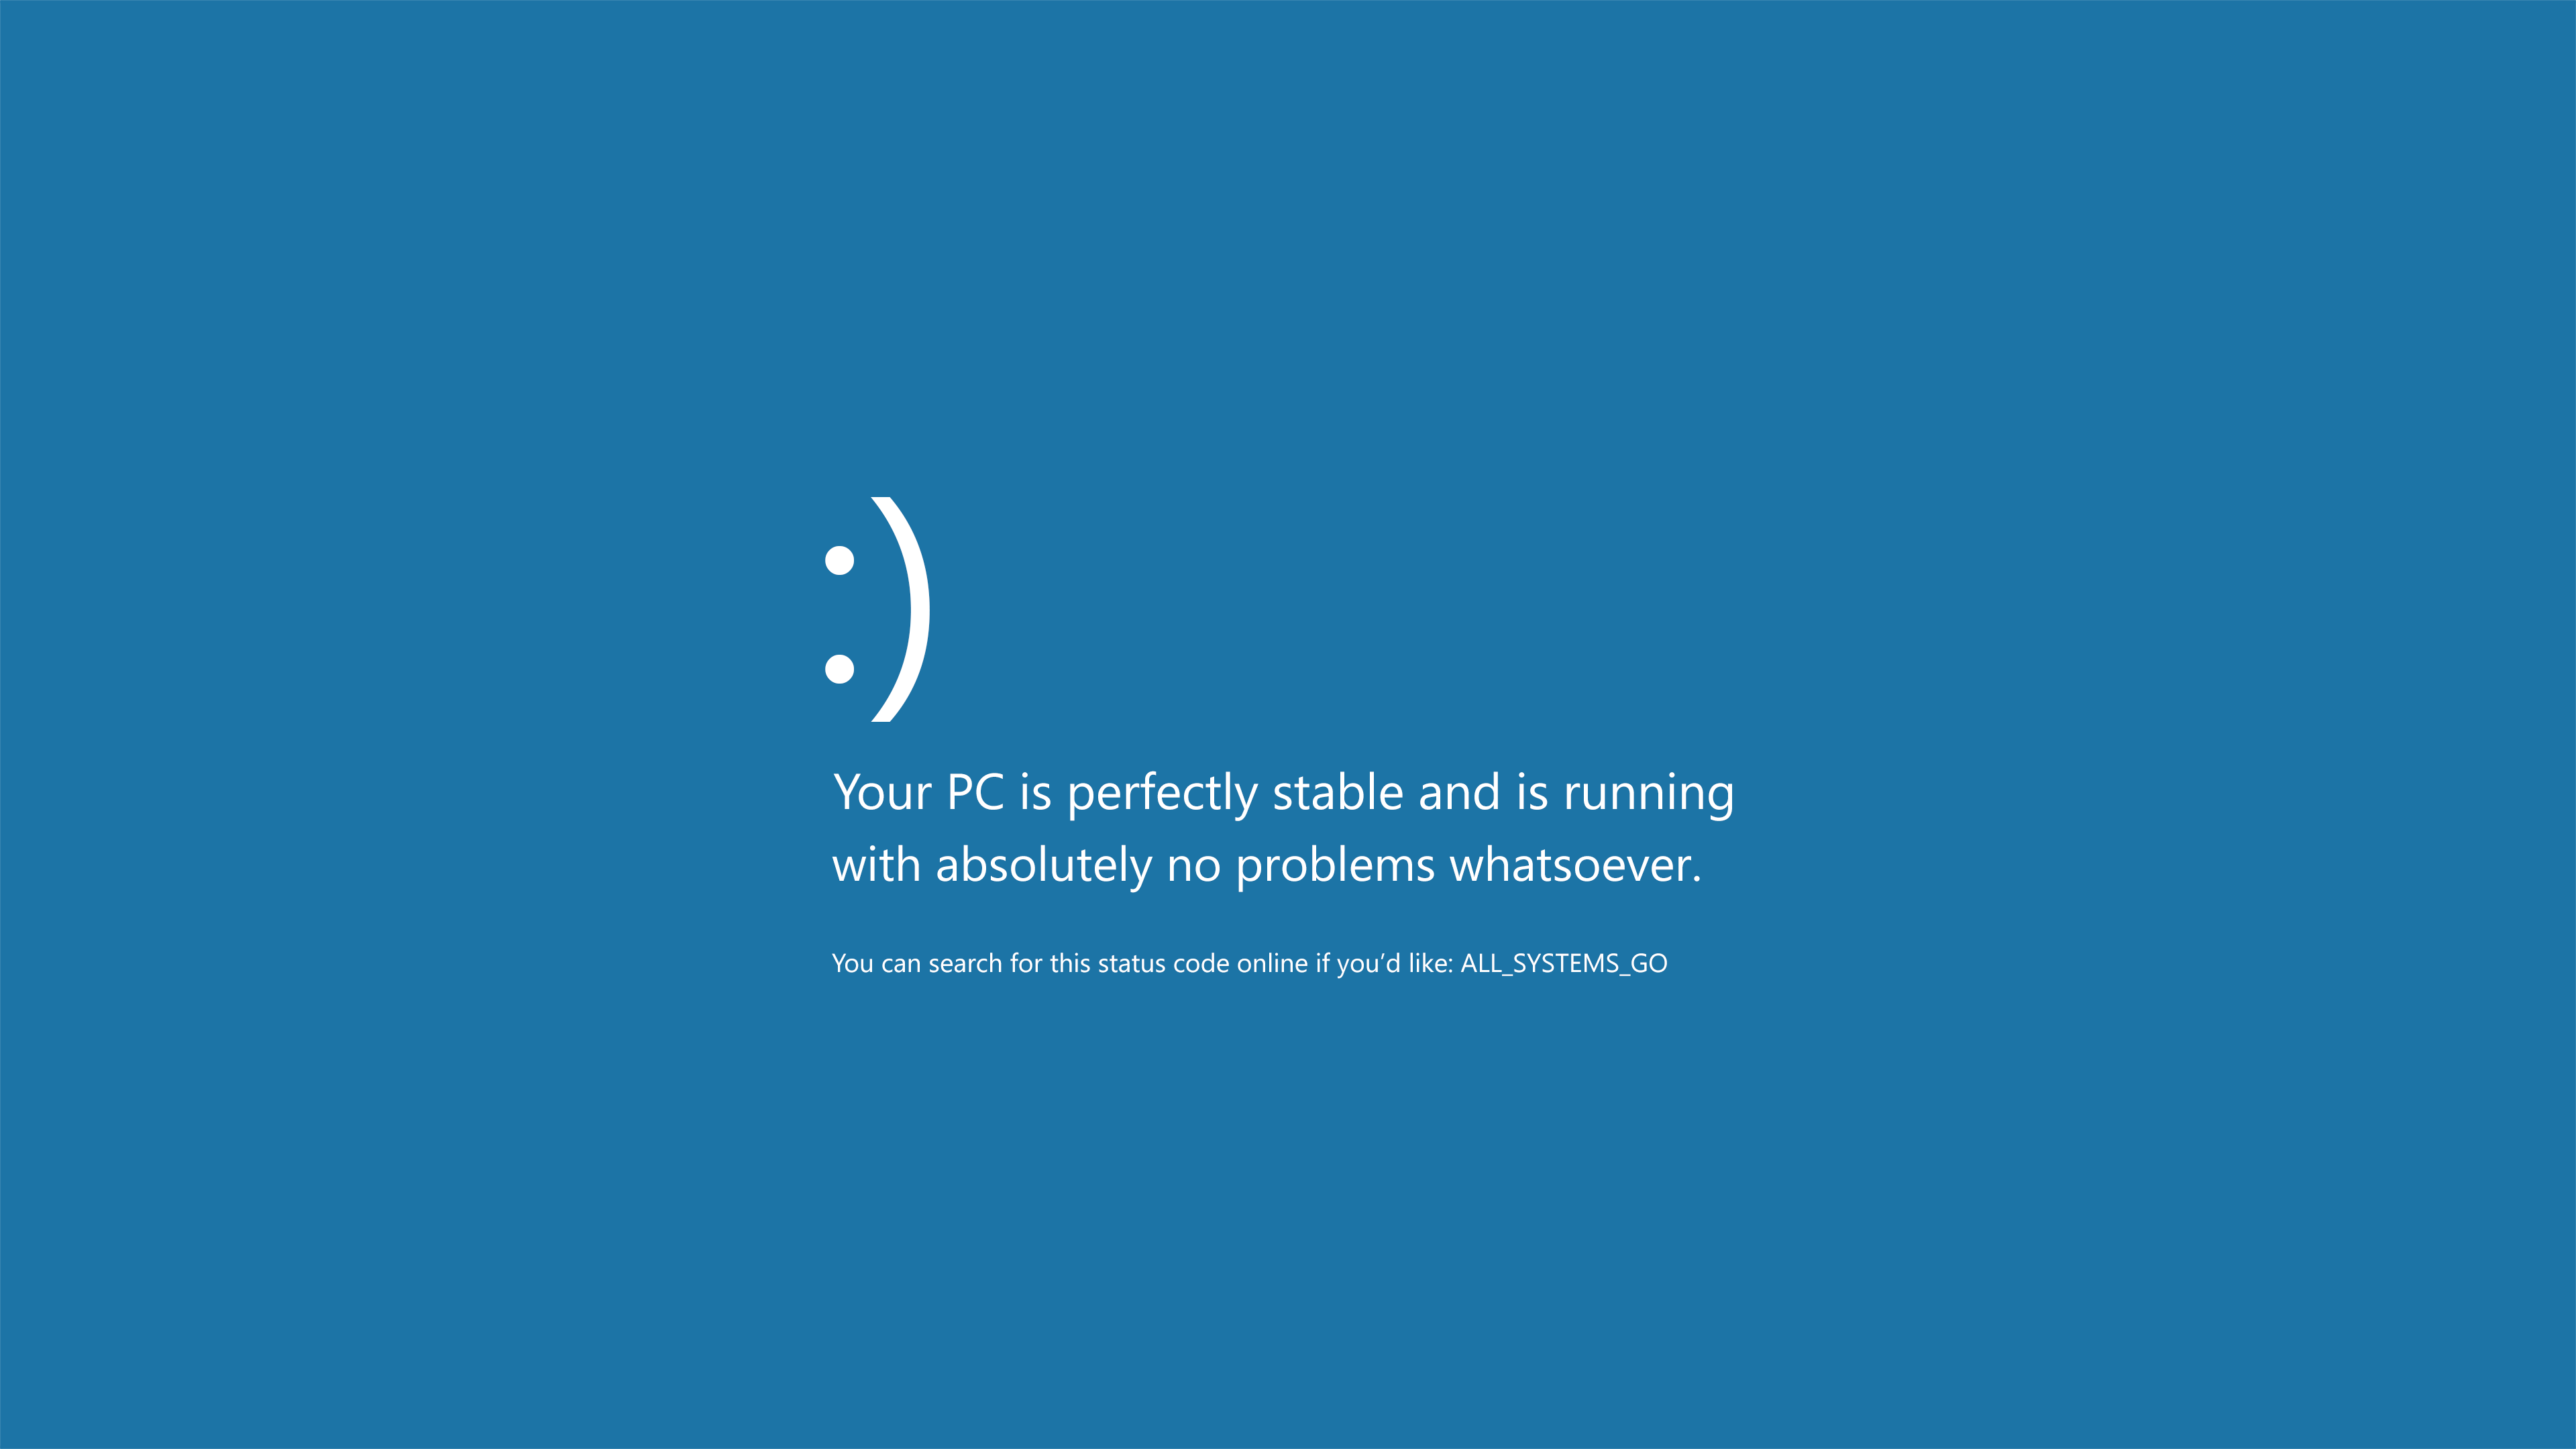 this-4k-bsod-wallpaper-is-the-perfect-choice-for-windows-10-fanboys-513540-2.png